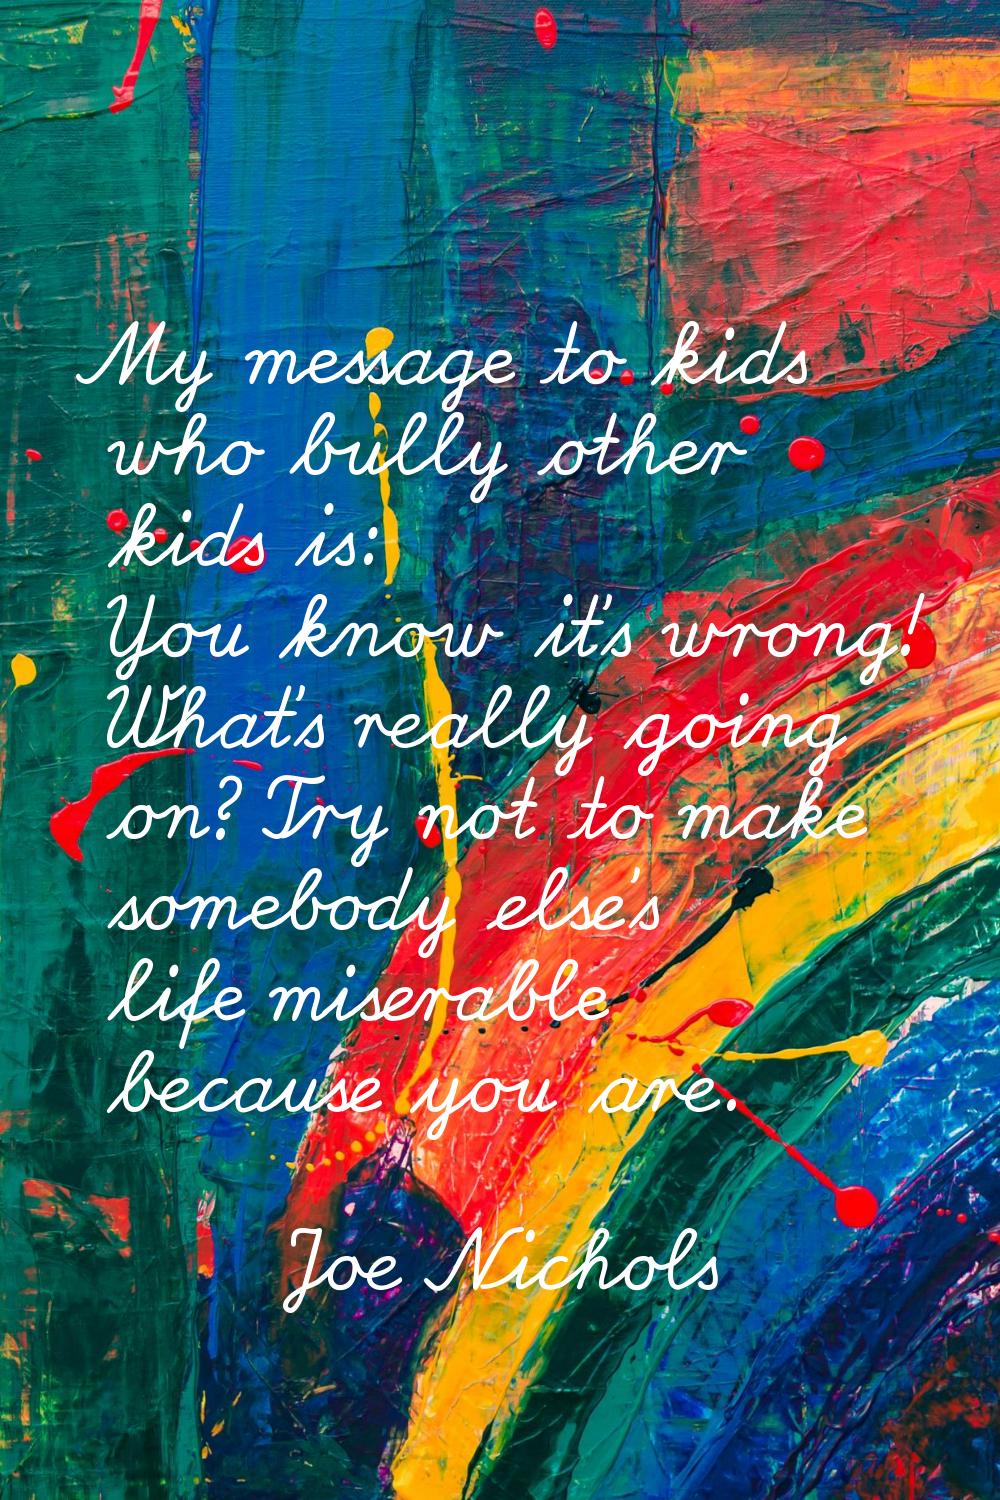 My message to kids who bully other kids is: You know it's wrong! What's really going on? Try not to